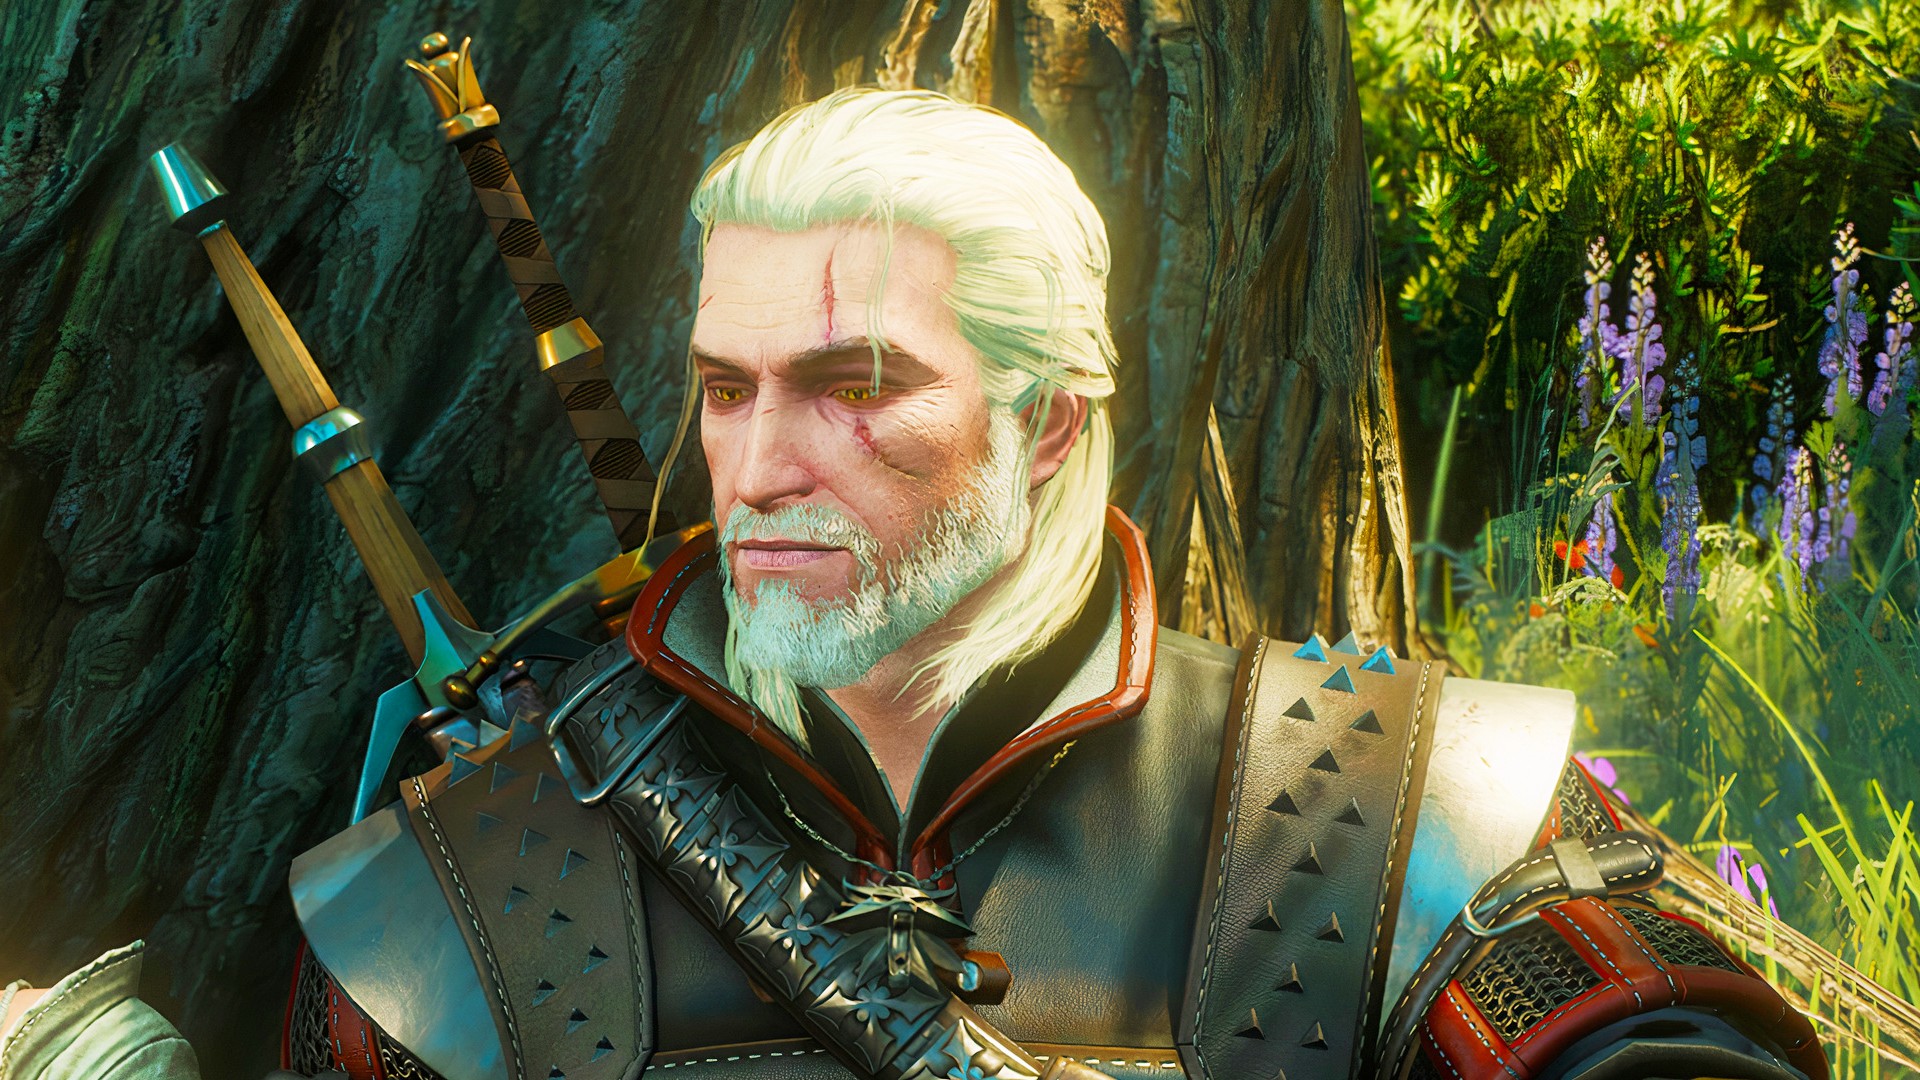 The Witcher 3 is the best open-world game of the year - Polygon